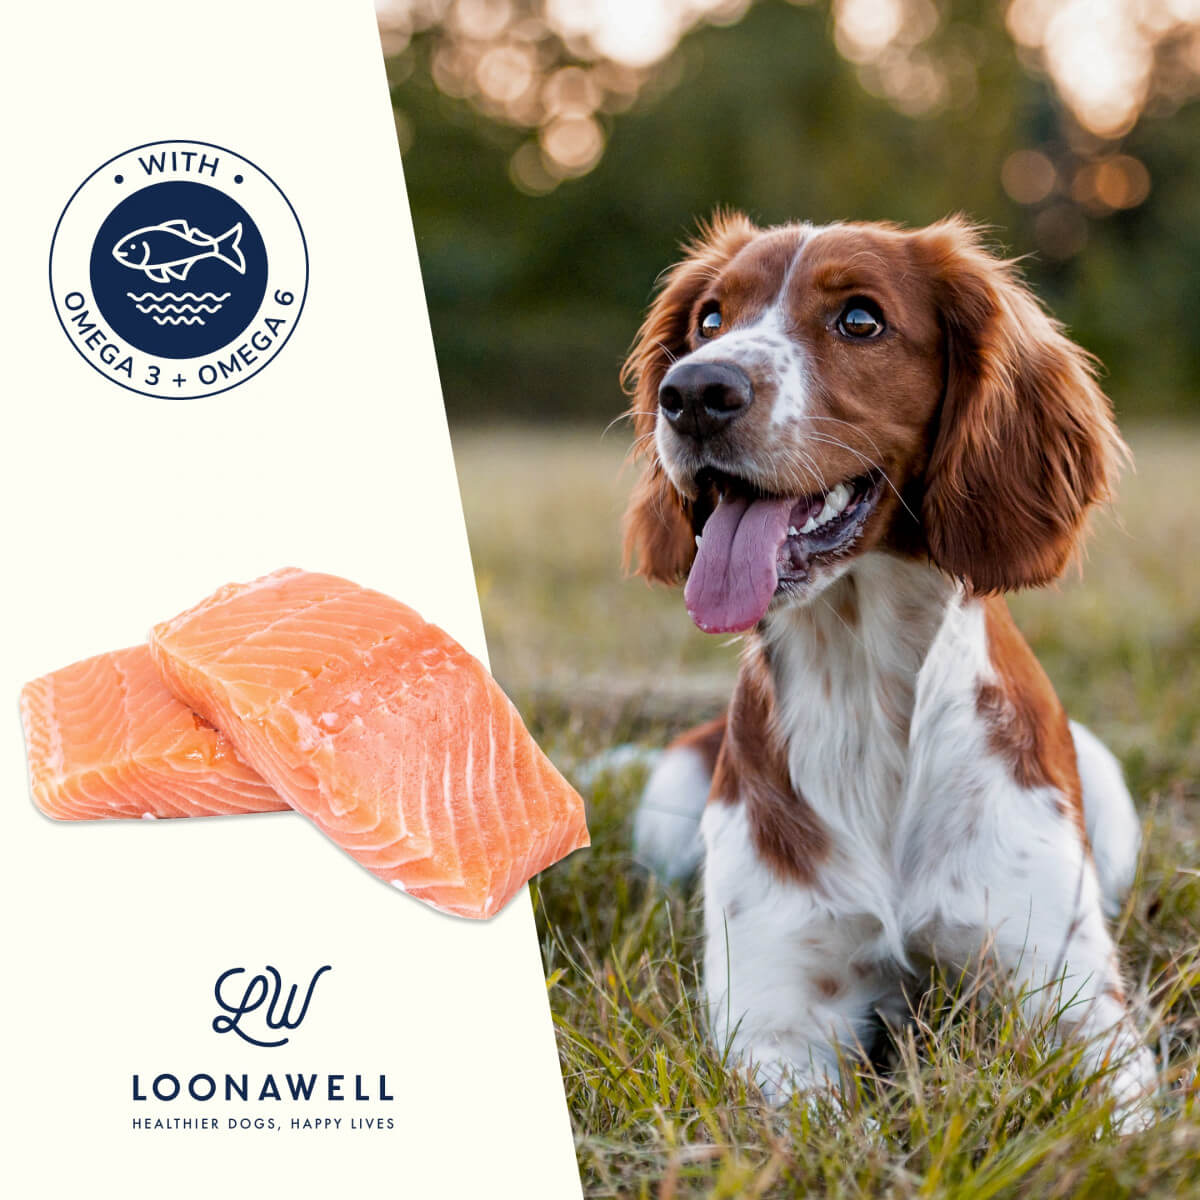 The One Key Benefit of Salmon For Dogs